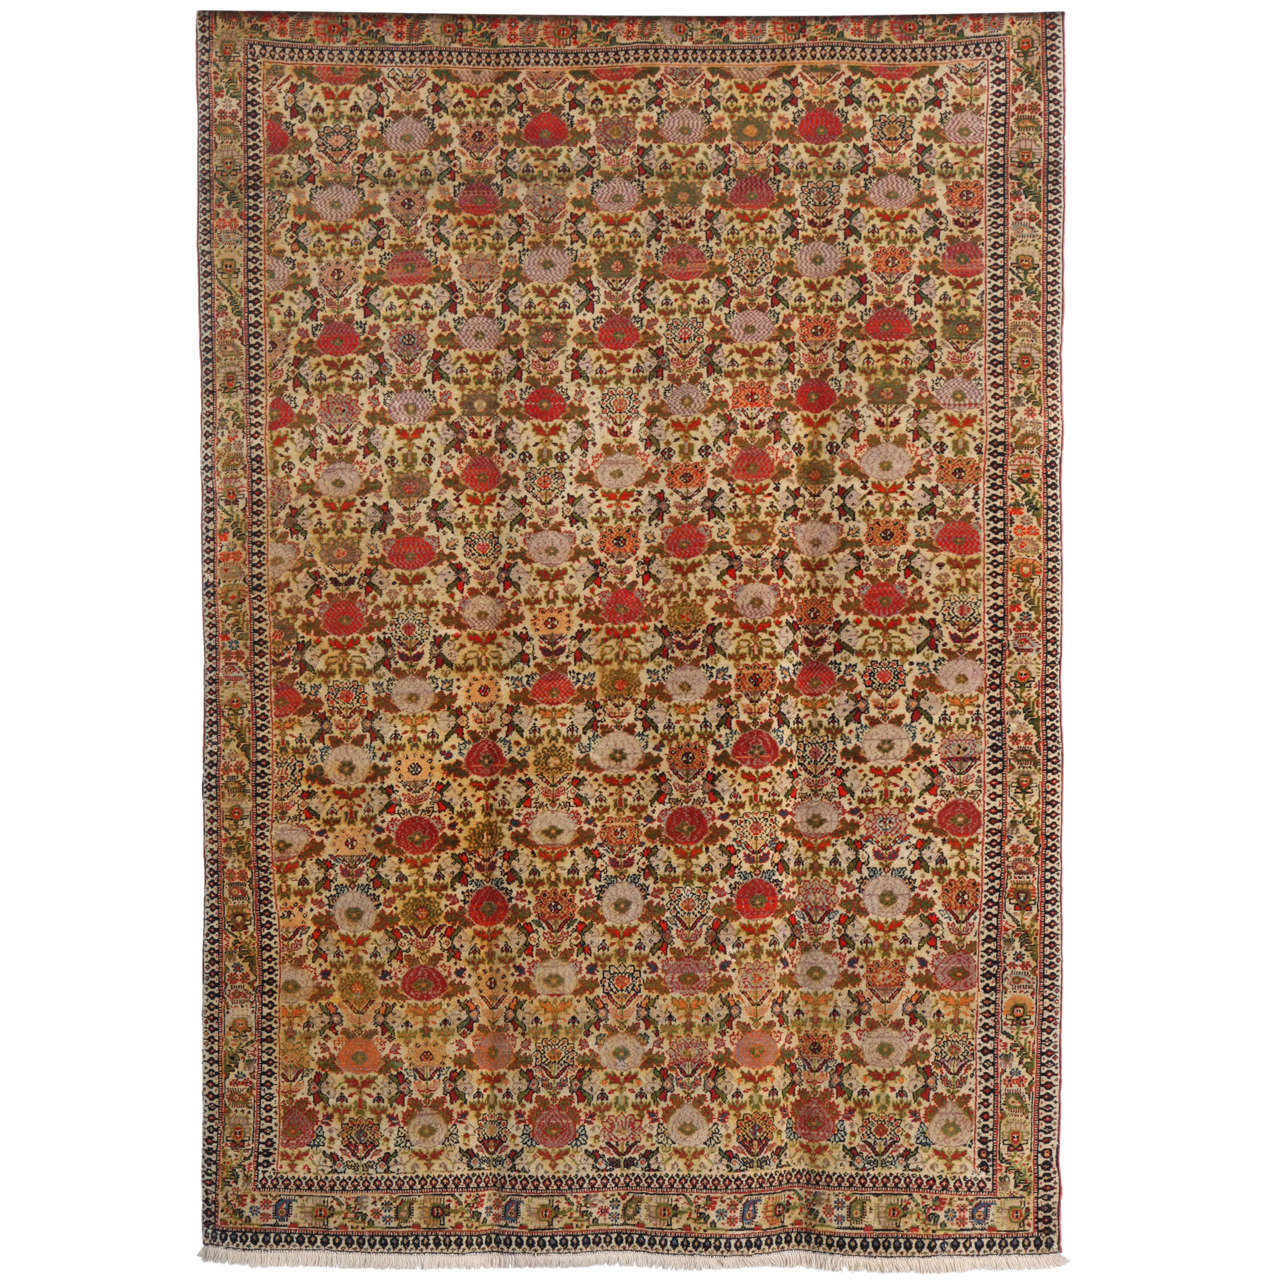 Antique 1890s Persian Mishan Malayer Rug, 4x7